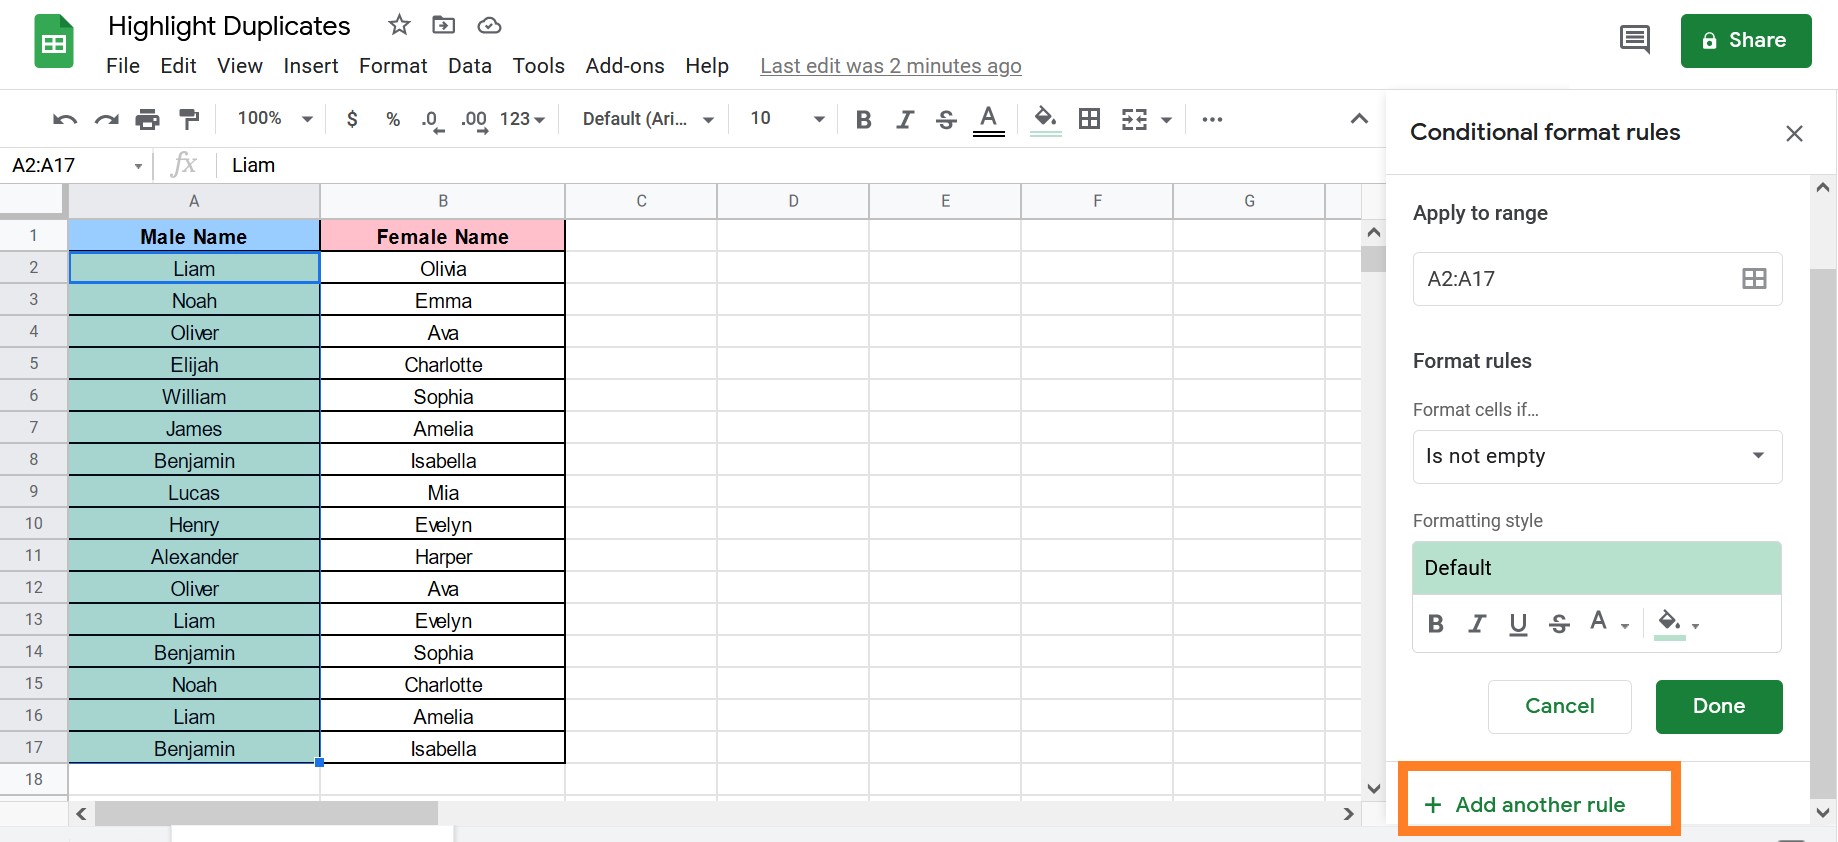 how to highlight duplicates in google sheets